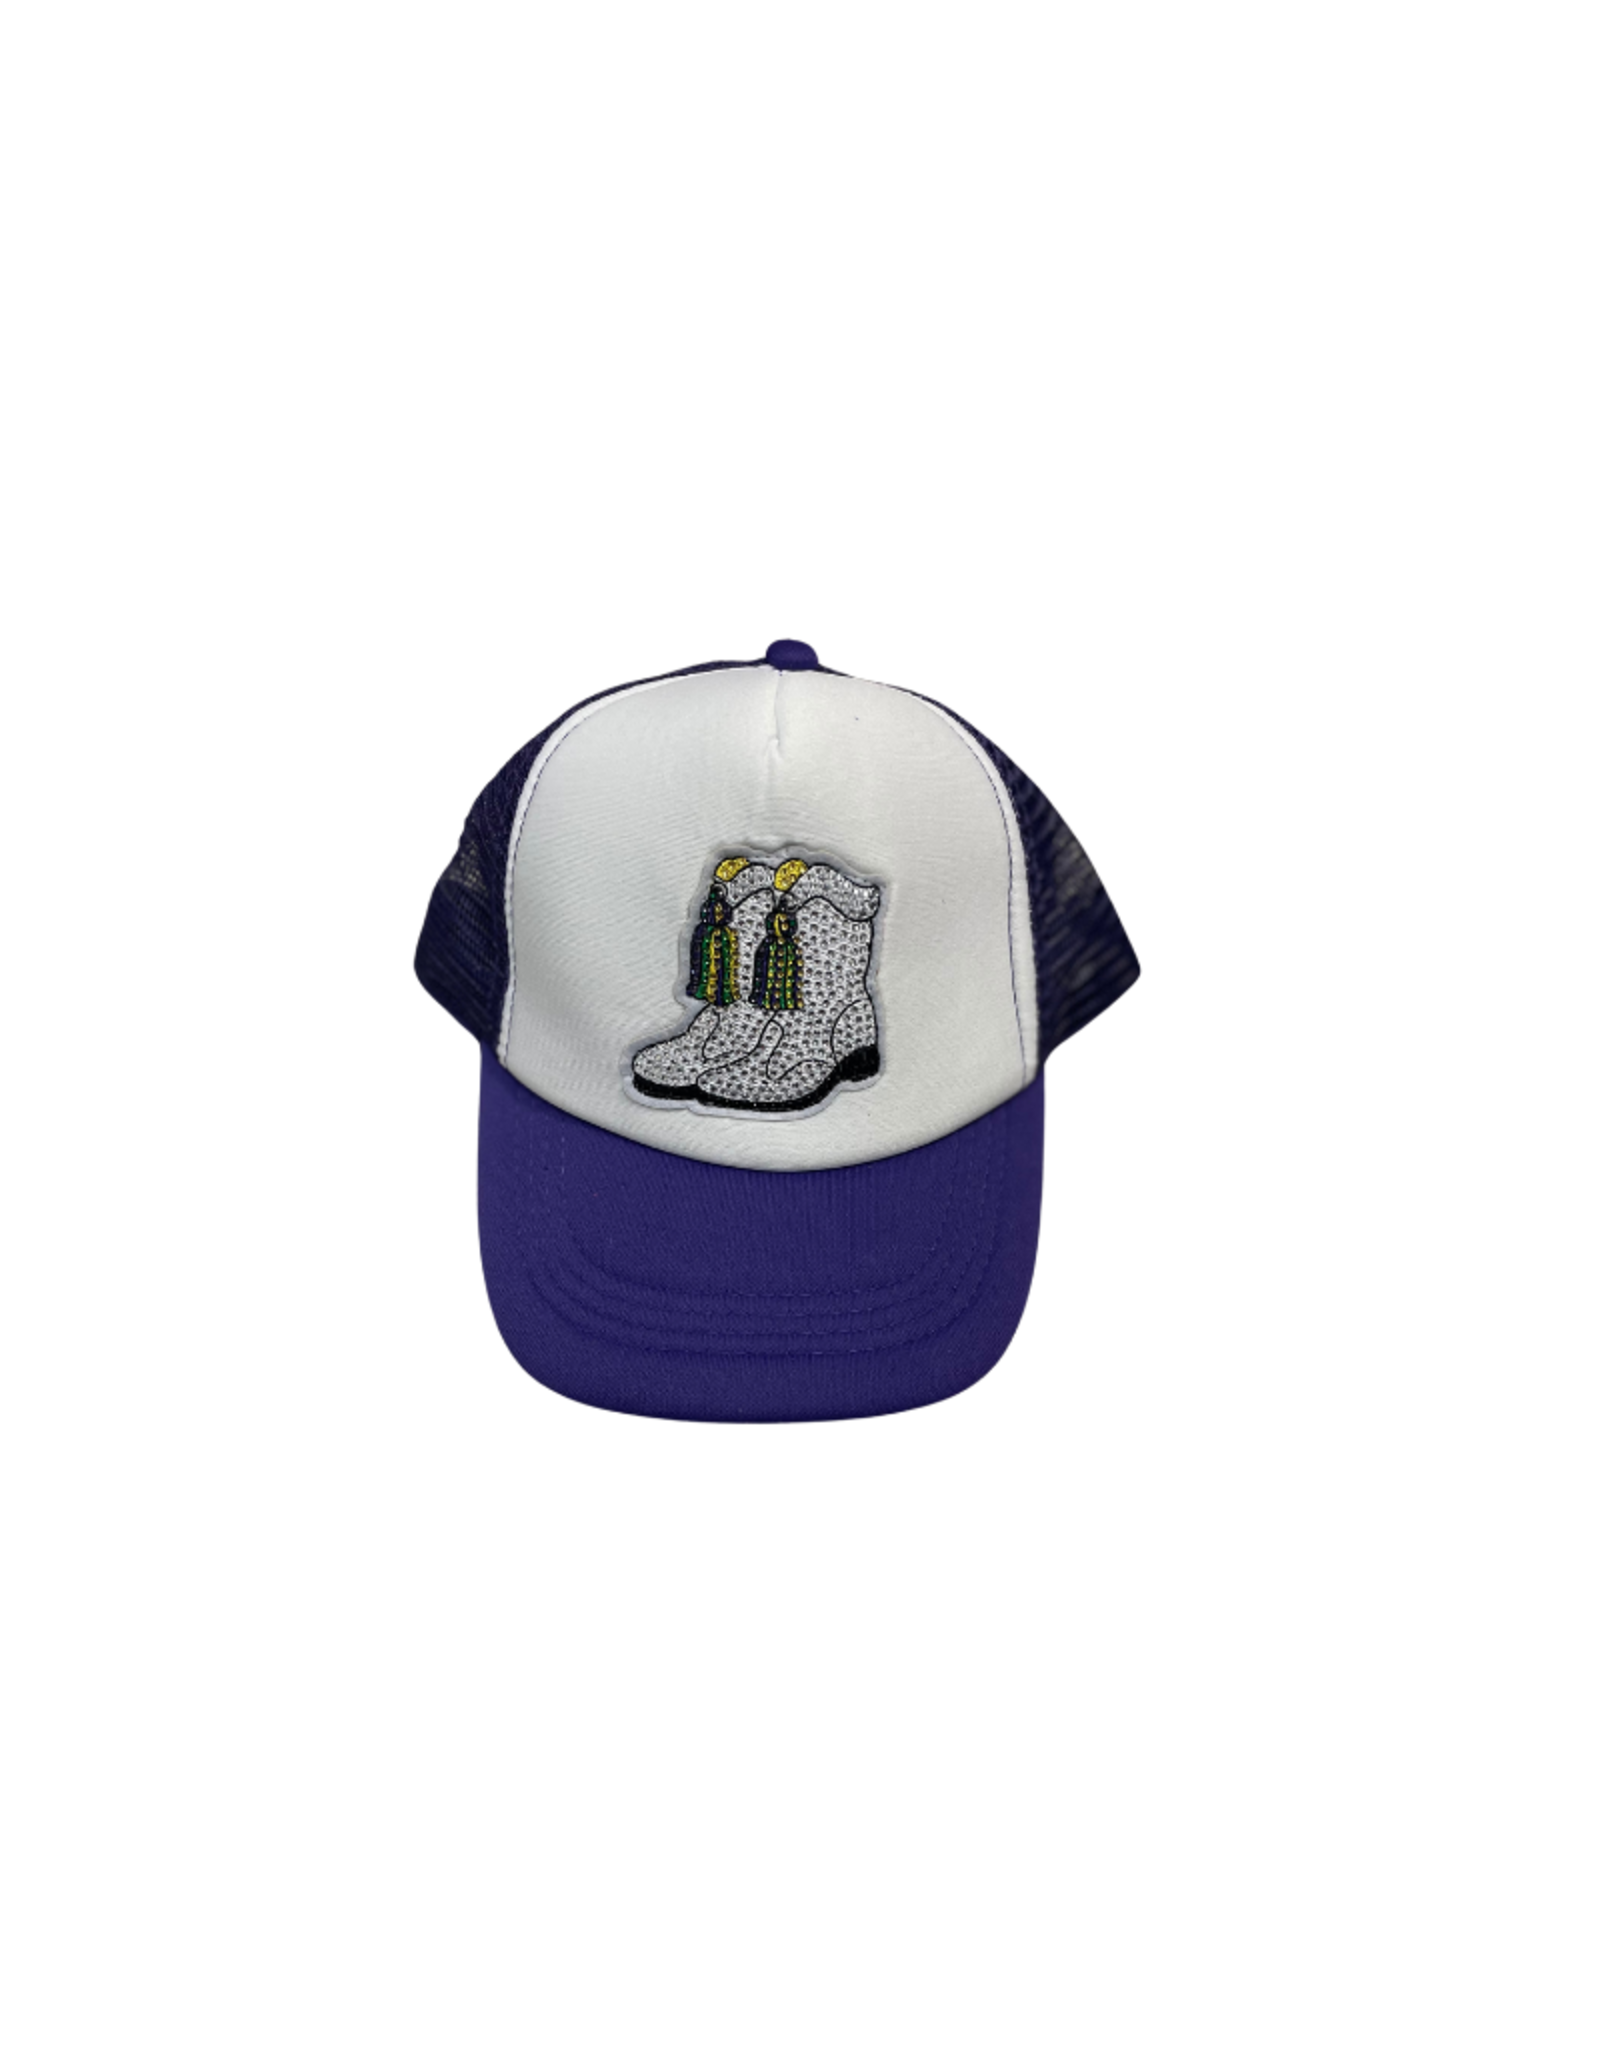 Youth Mardi Gras Marching Boot Trucker Hat